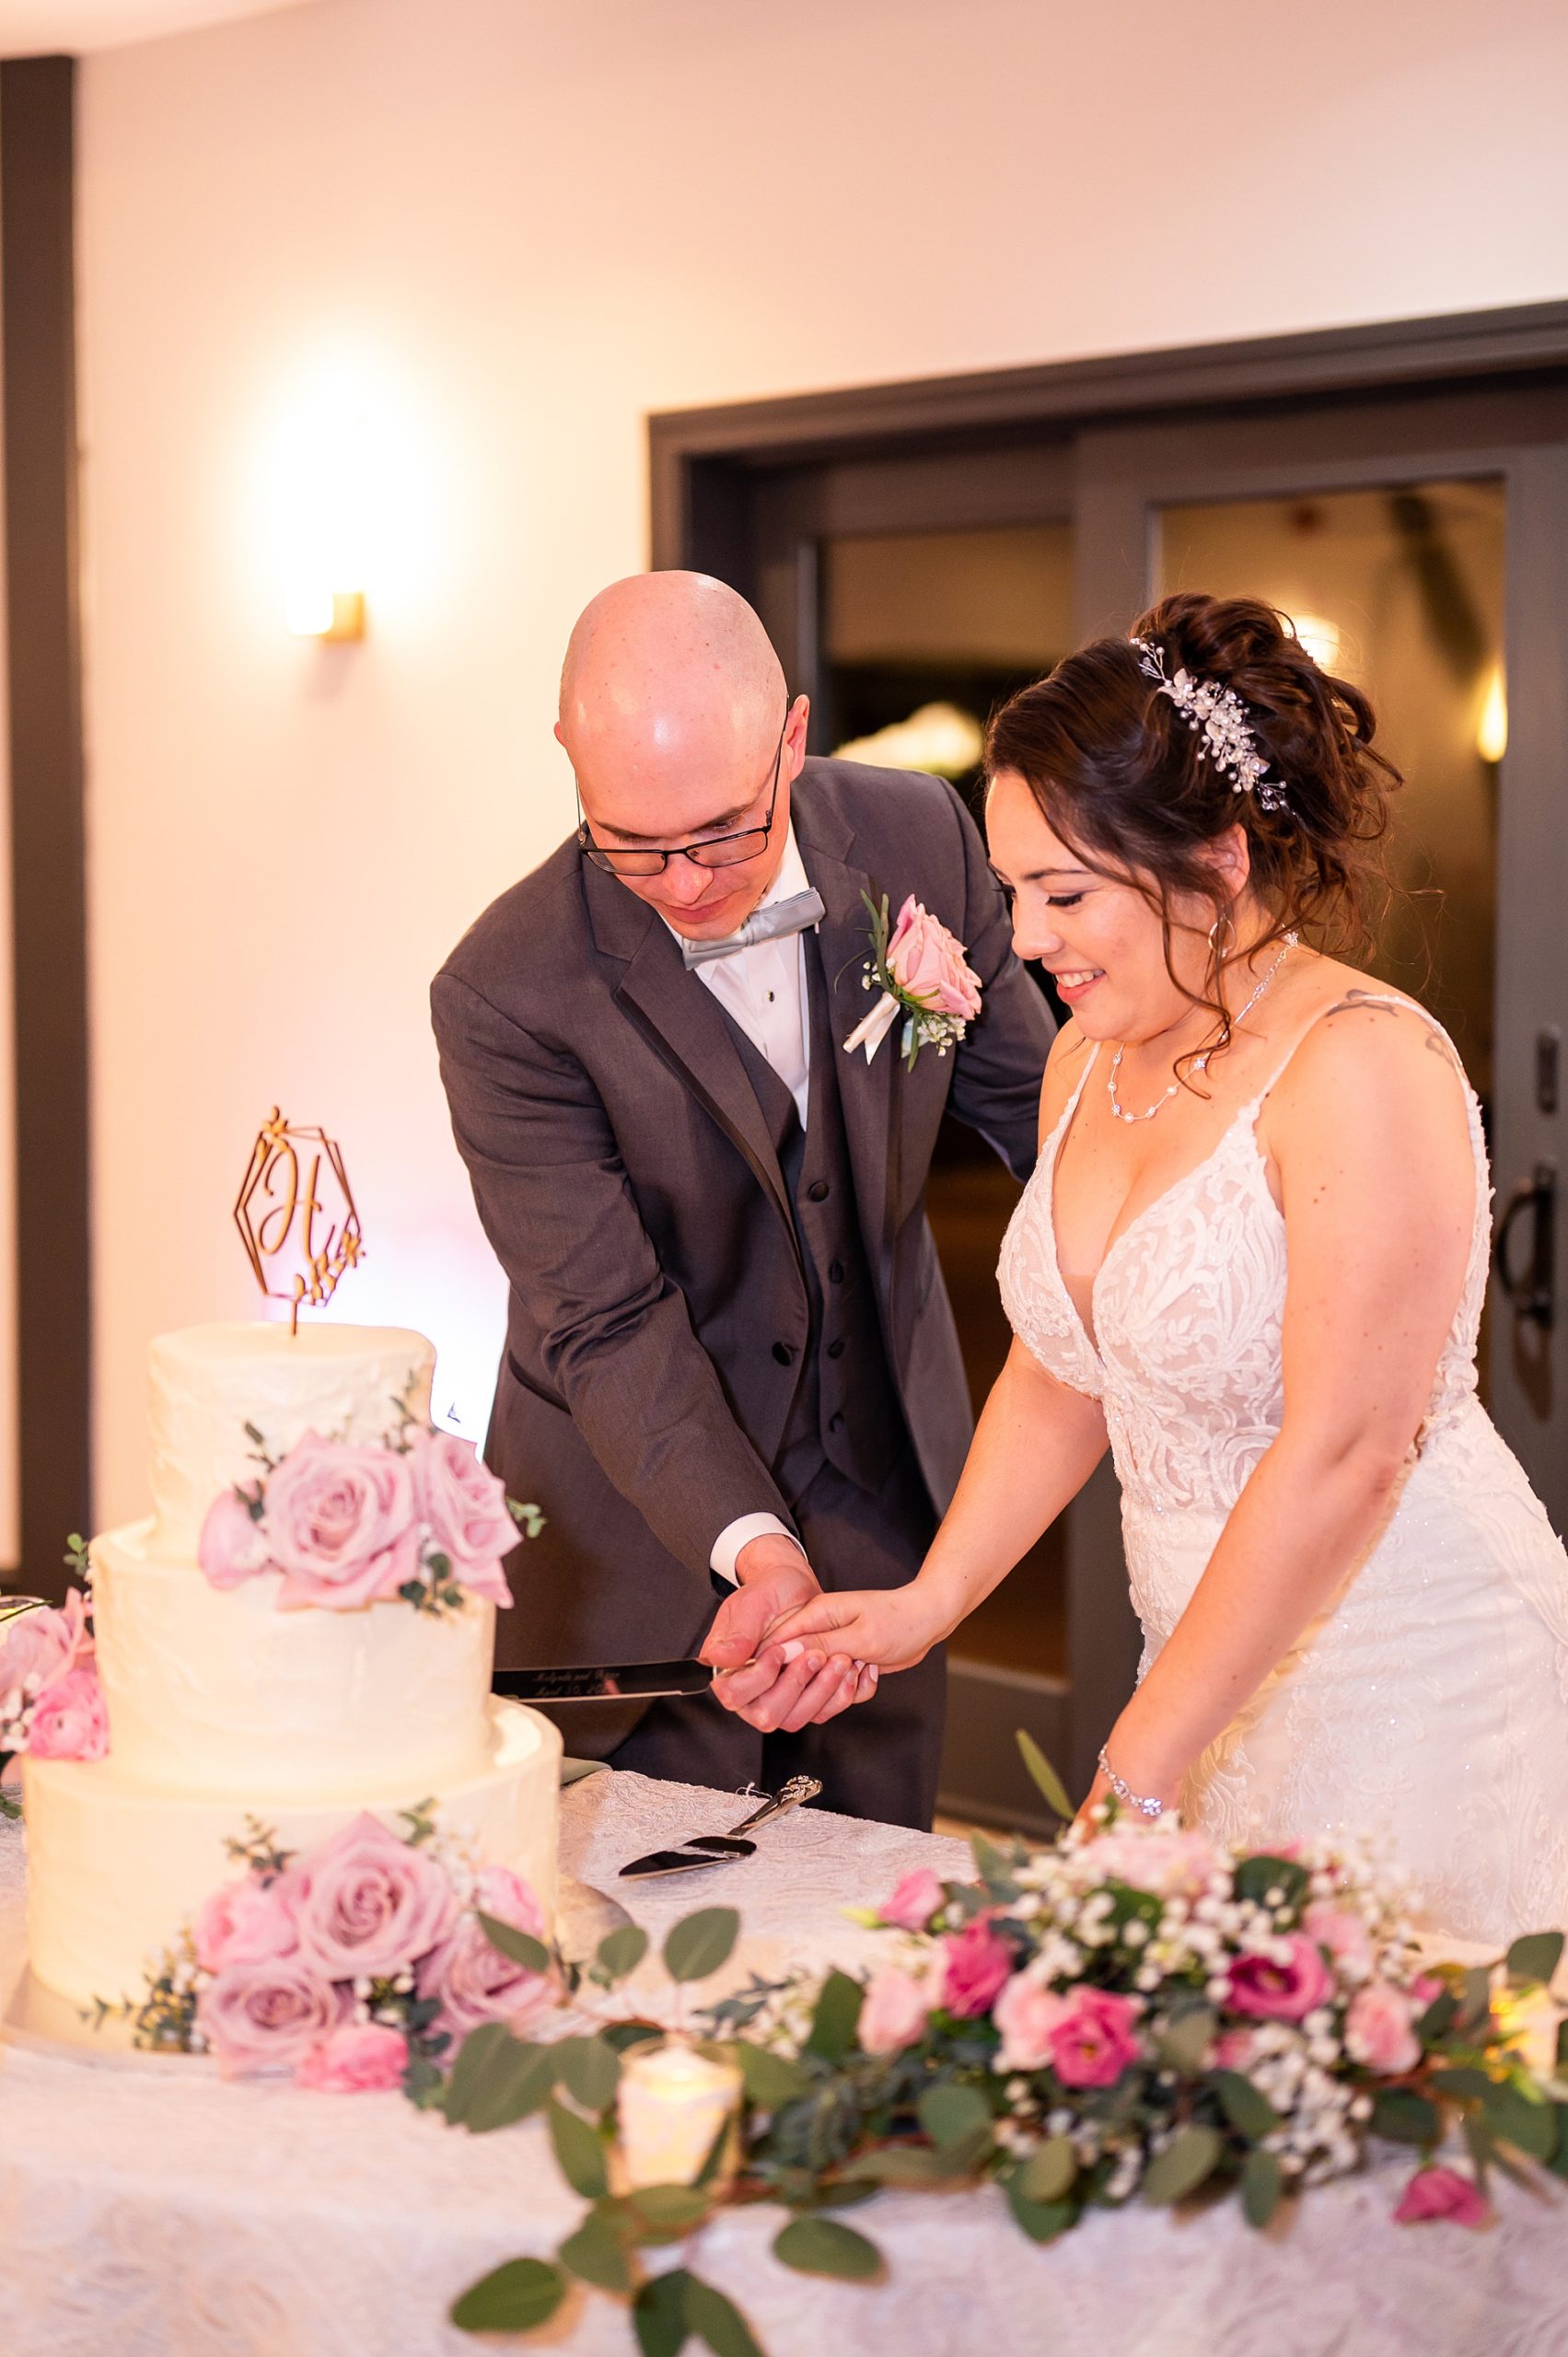 couple cut their tiered wedding cake